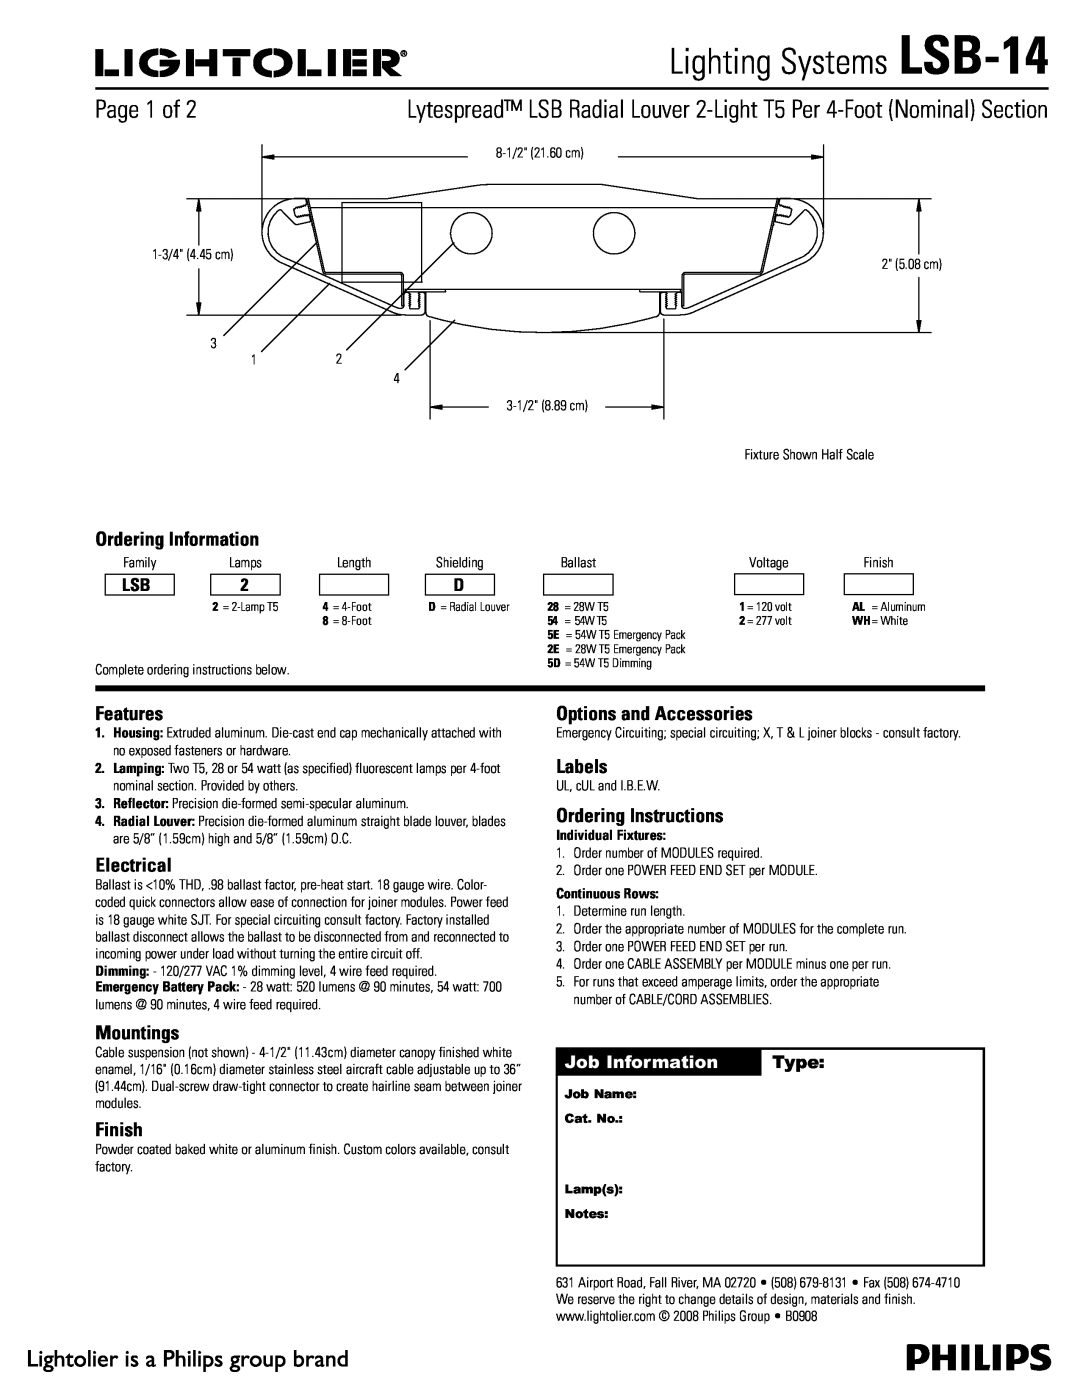 Lightolier LSB-14 manual Ordering Information, Features, Electrical, Mountings, Finish, Options and Accessories, Labels 